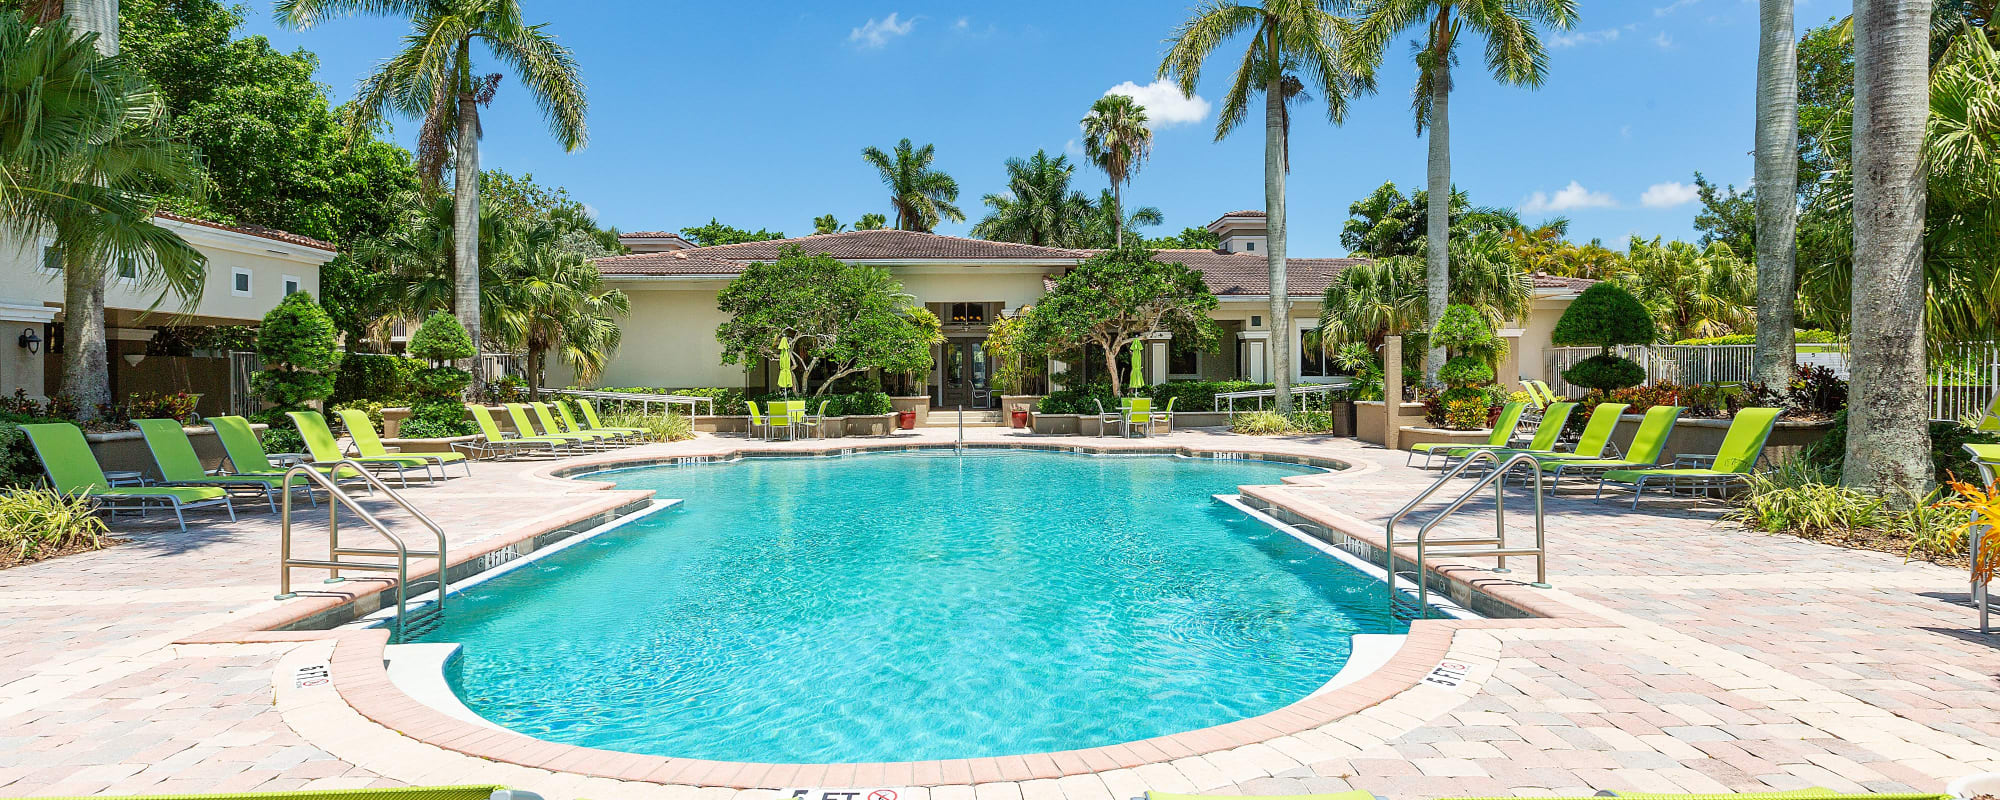 Schedule a tour of Ibis Reserve Apartments in West Palm Beach, Florida